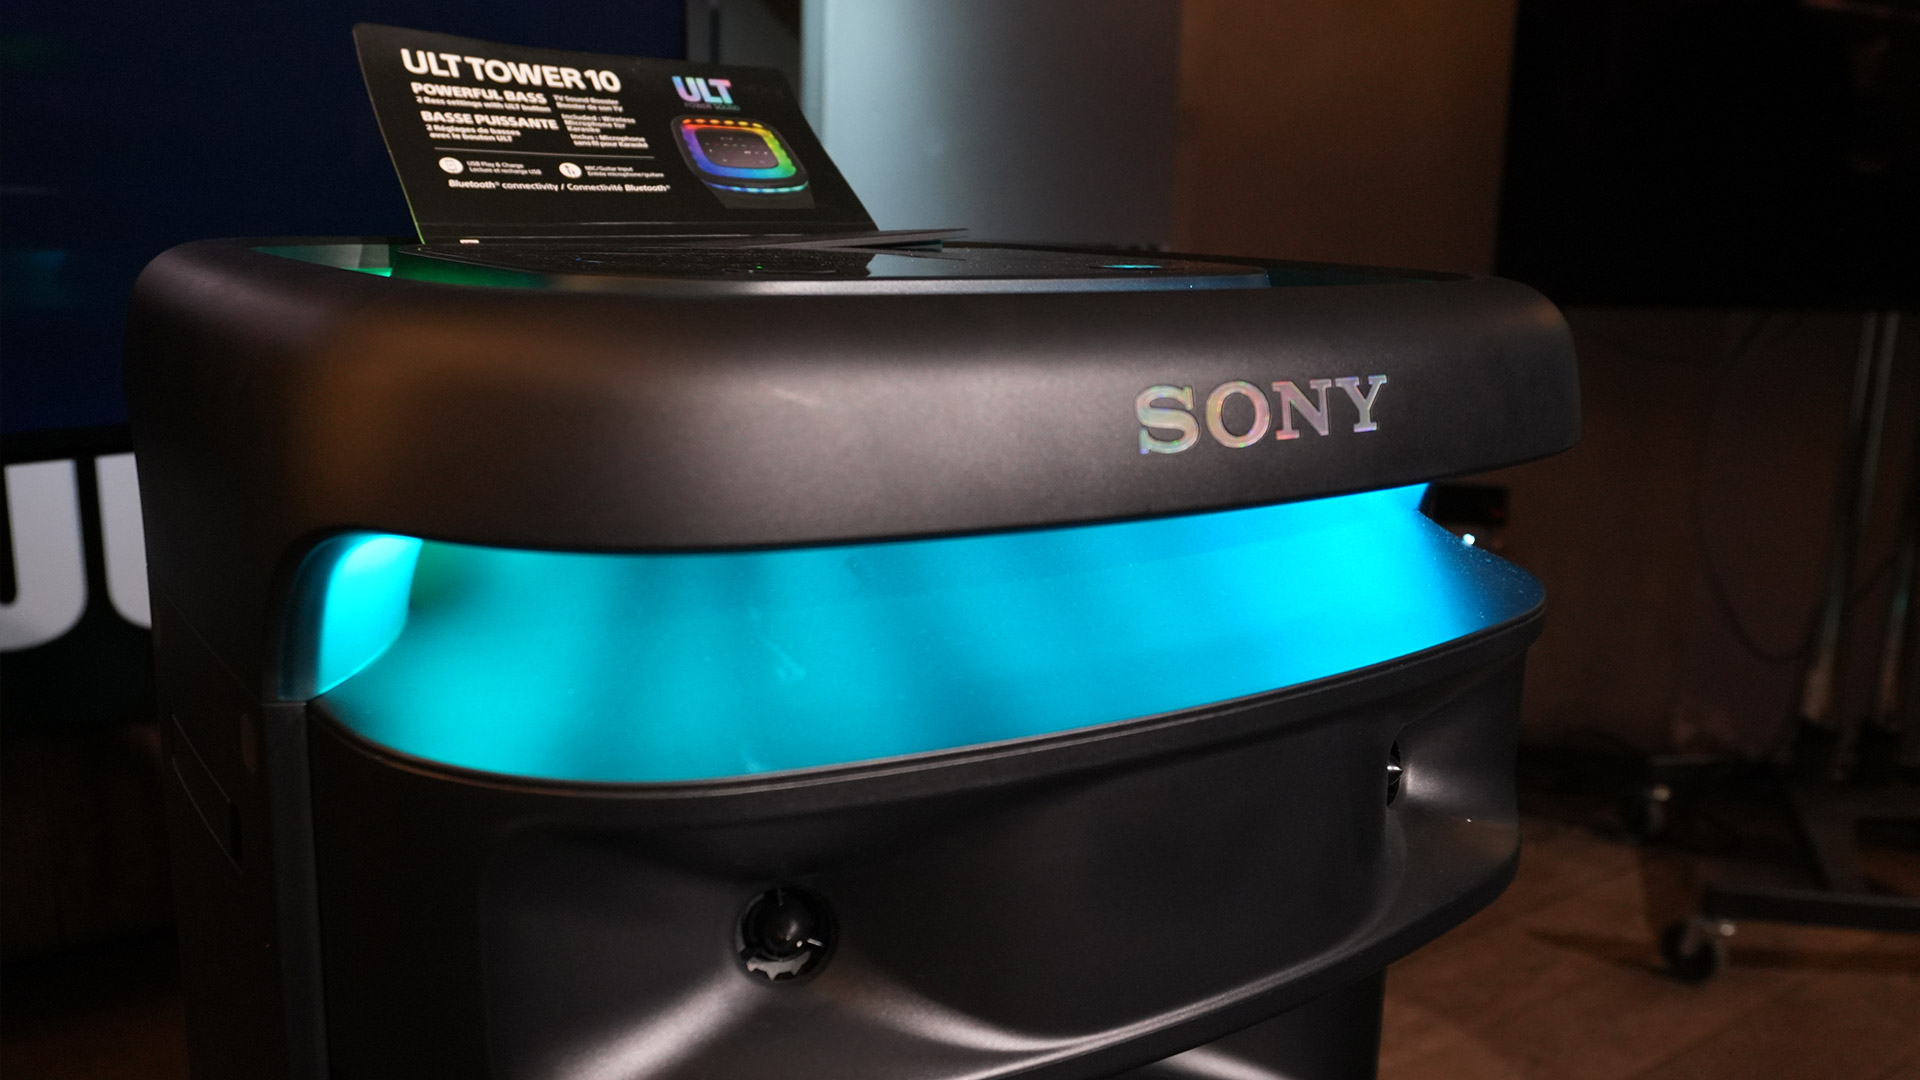 A close up of the Sony ULT Tower 10 speaker